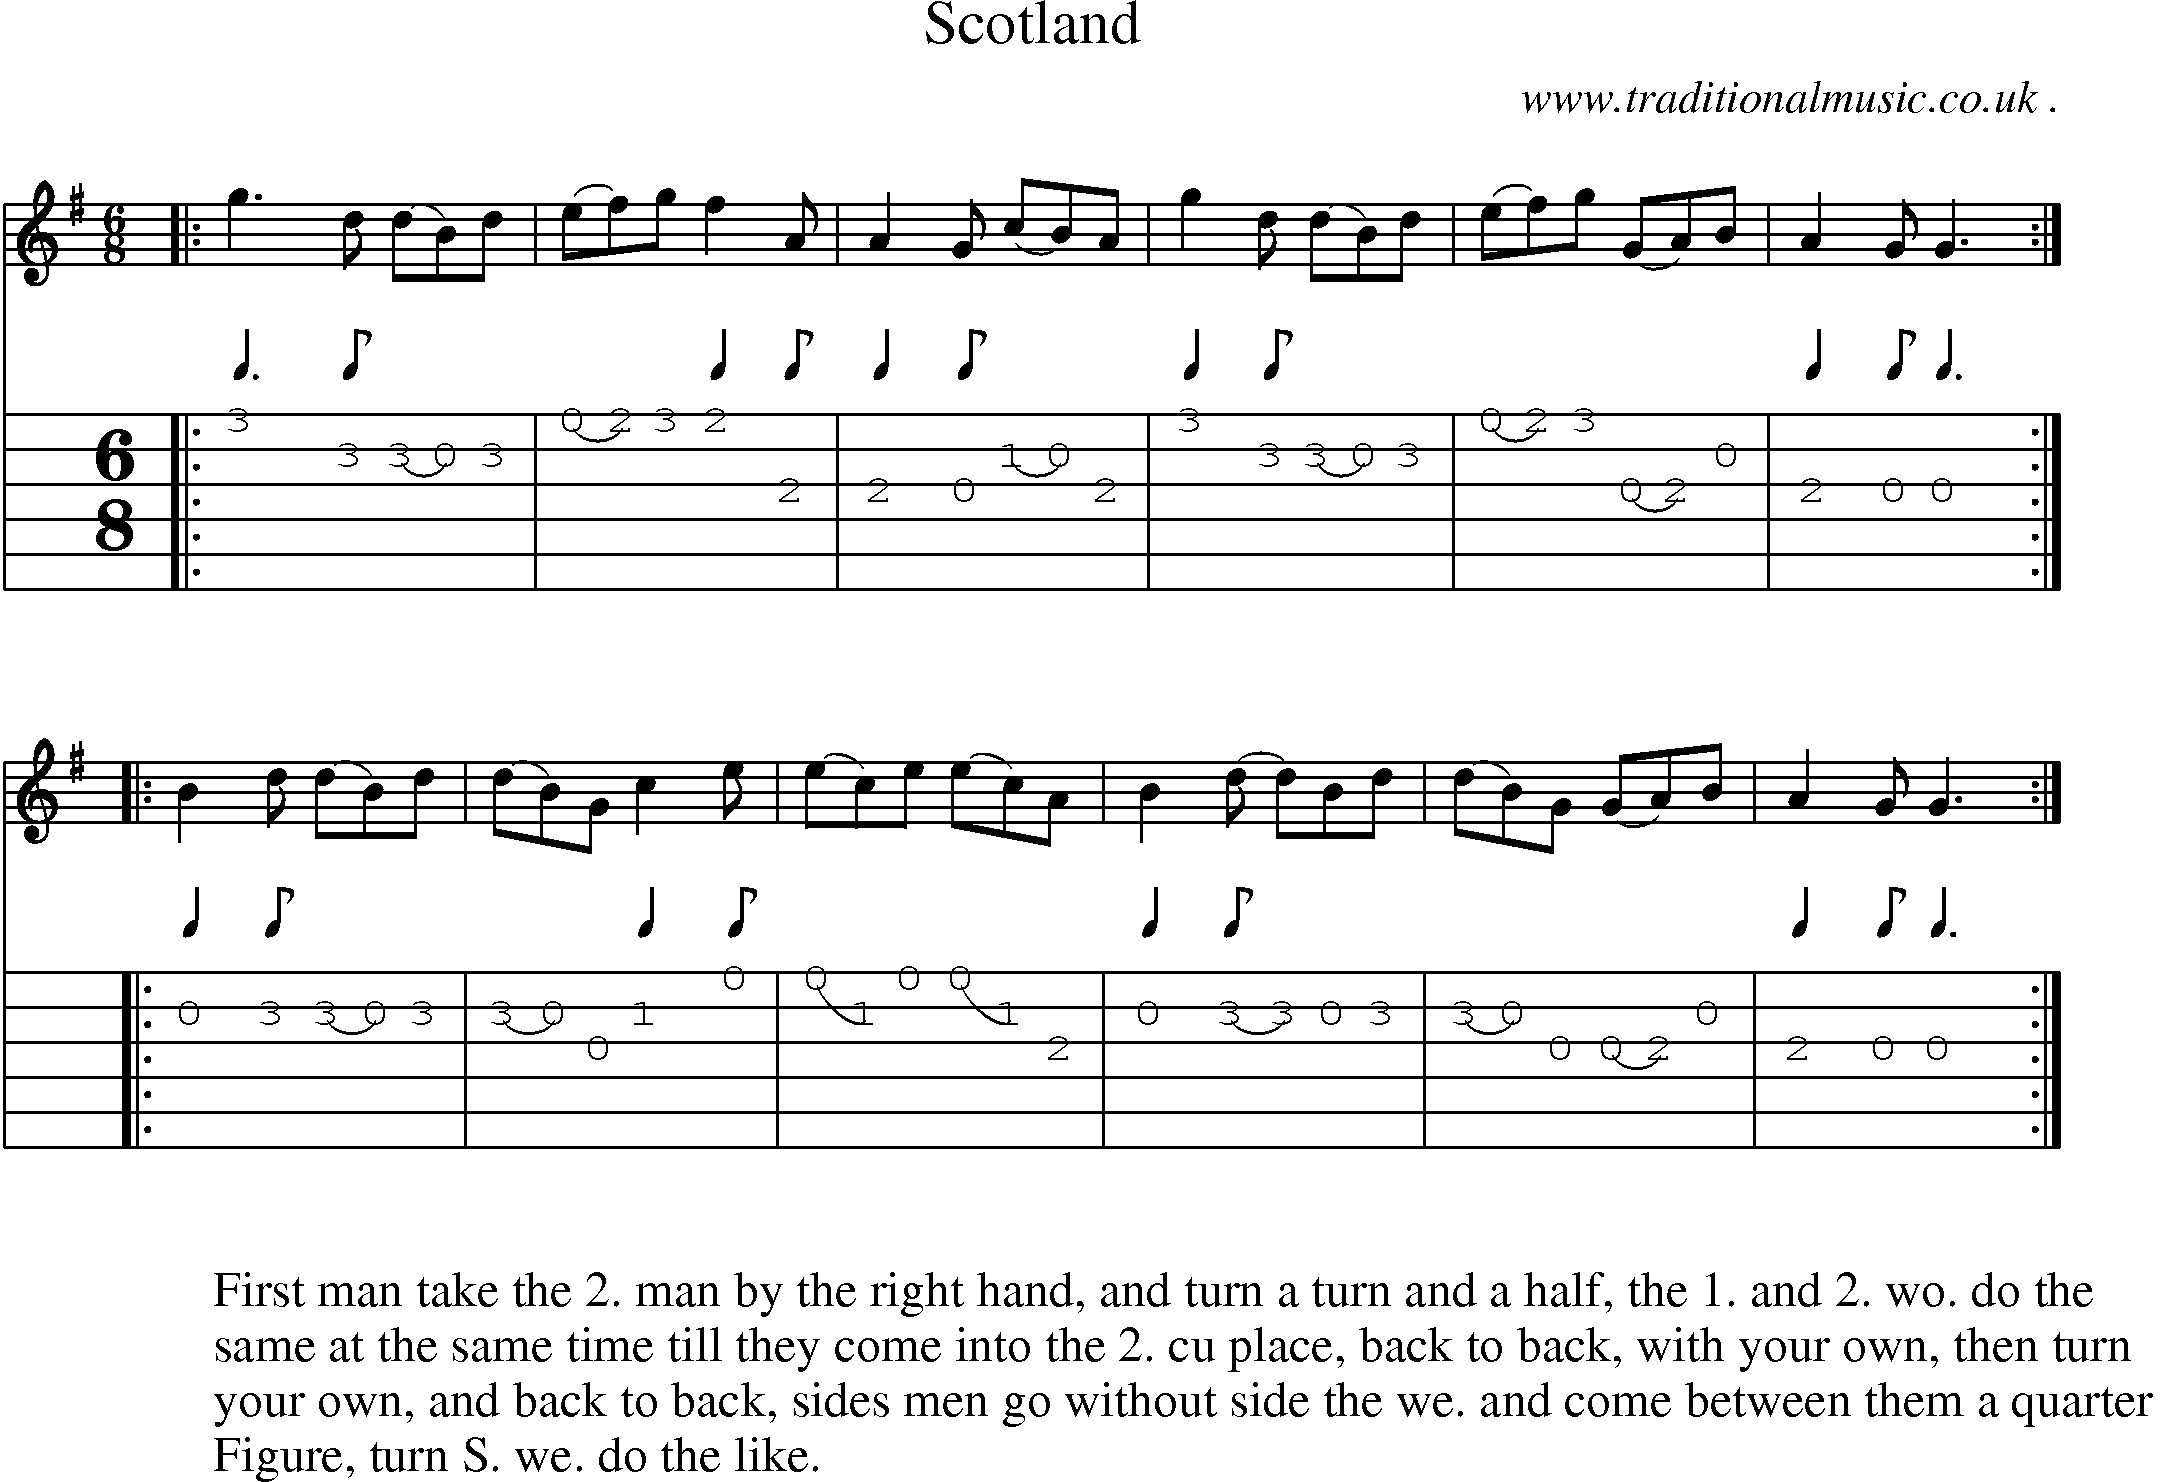 Sheet-music  score, Chords and Guitar Tabs for Scotland